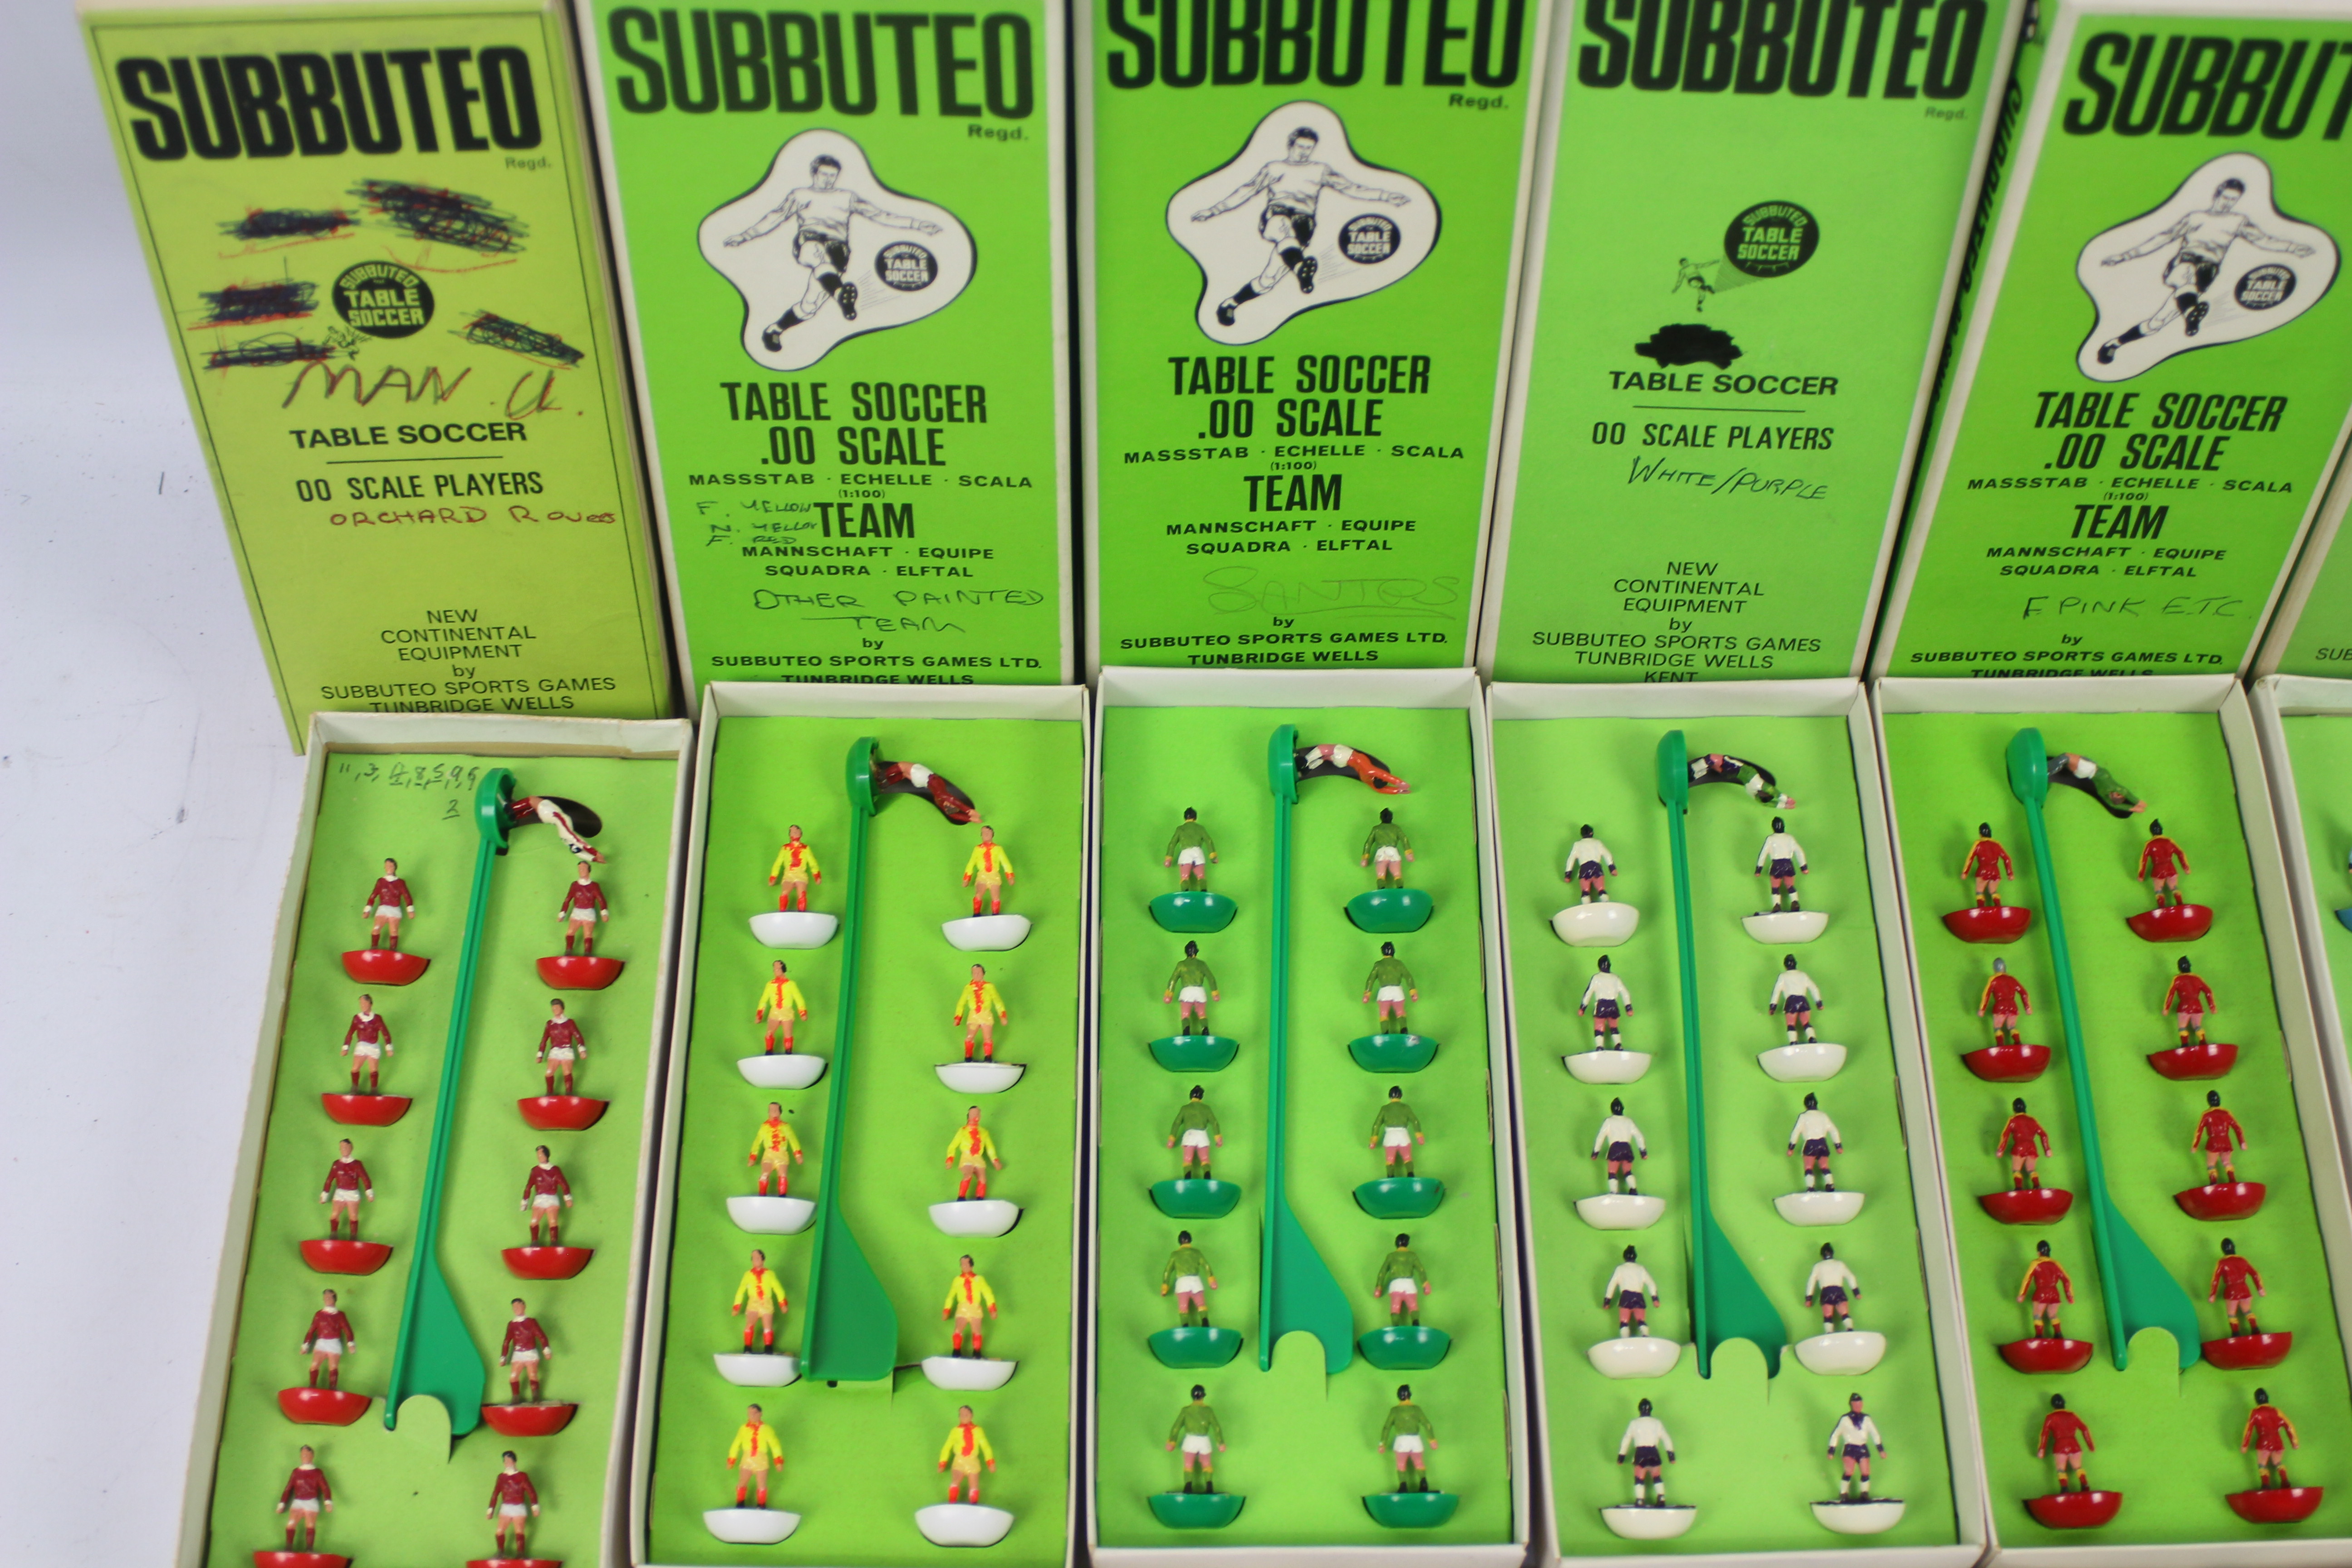 Subbuteo - Table Soccer - 00 Scale Players. - Image 2 of 7